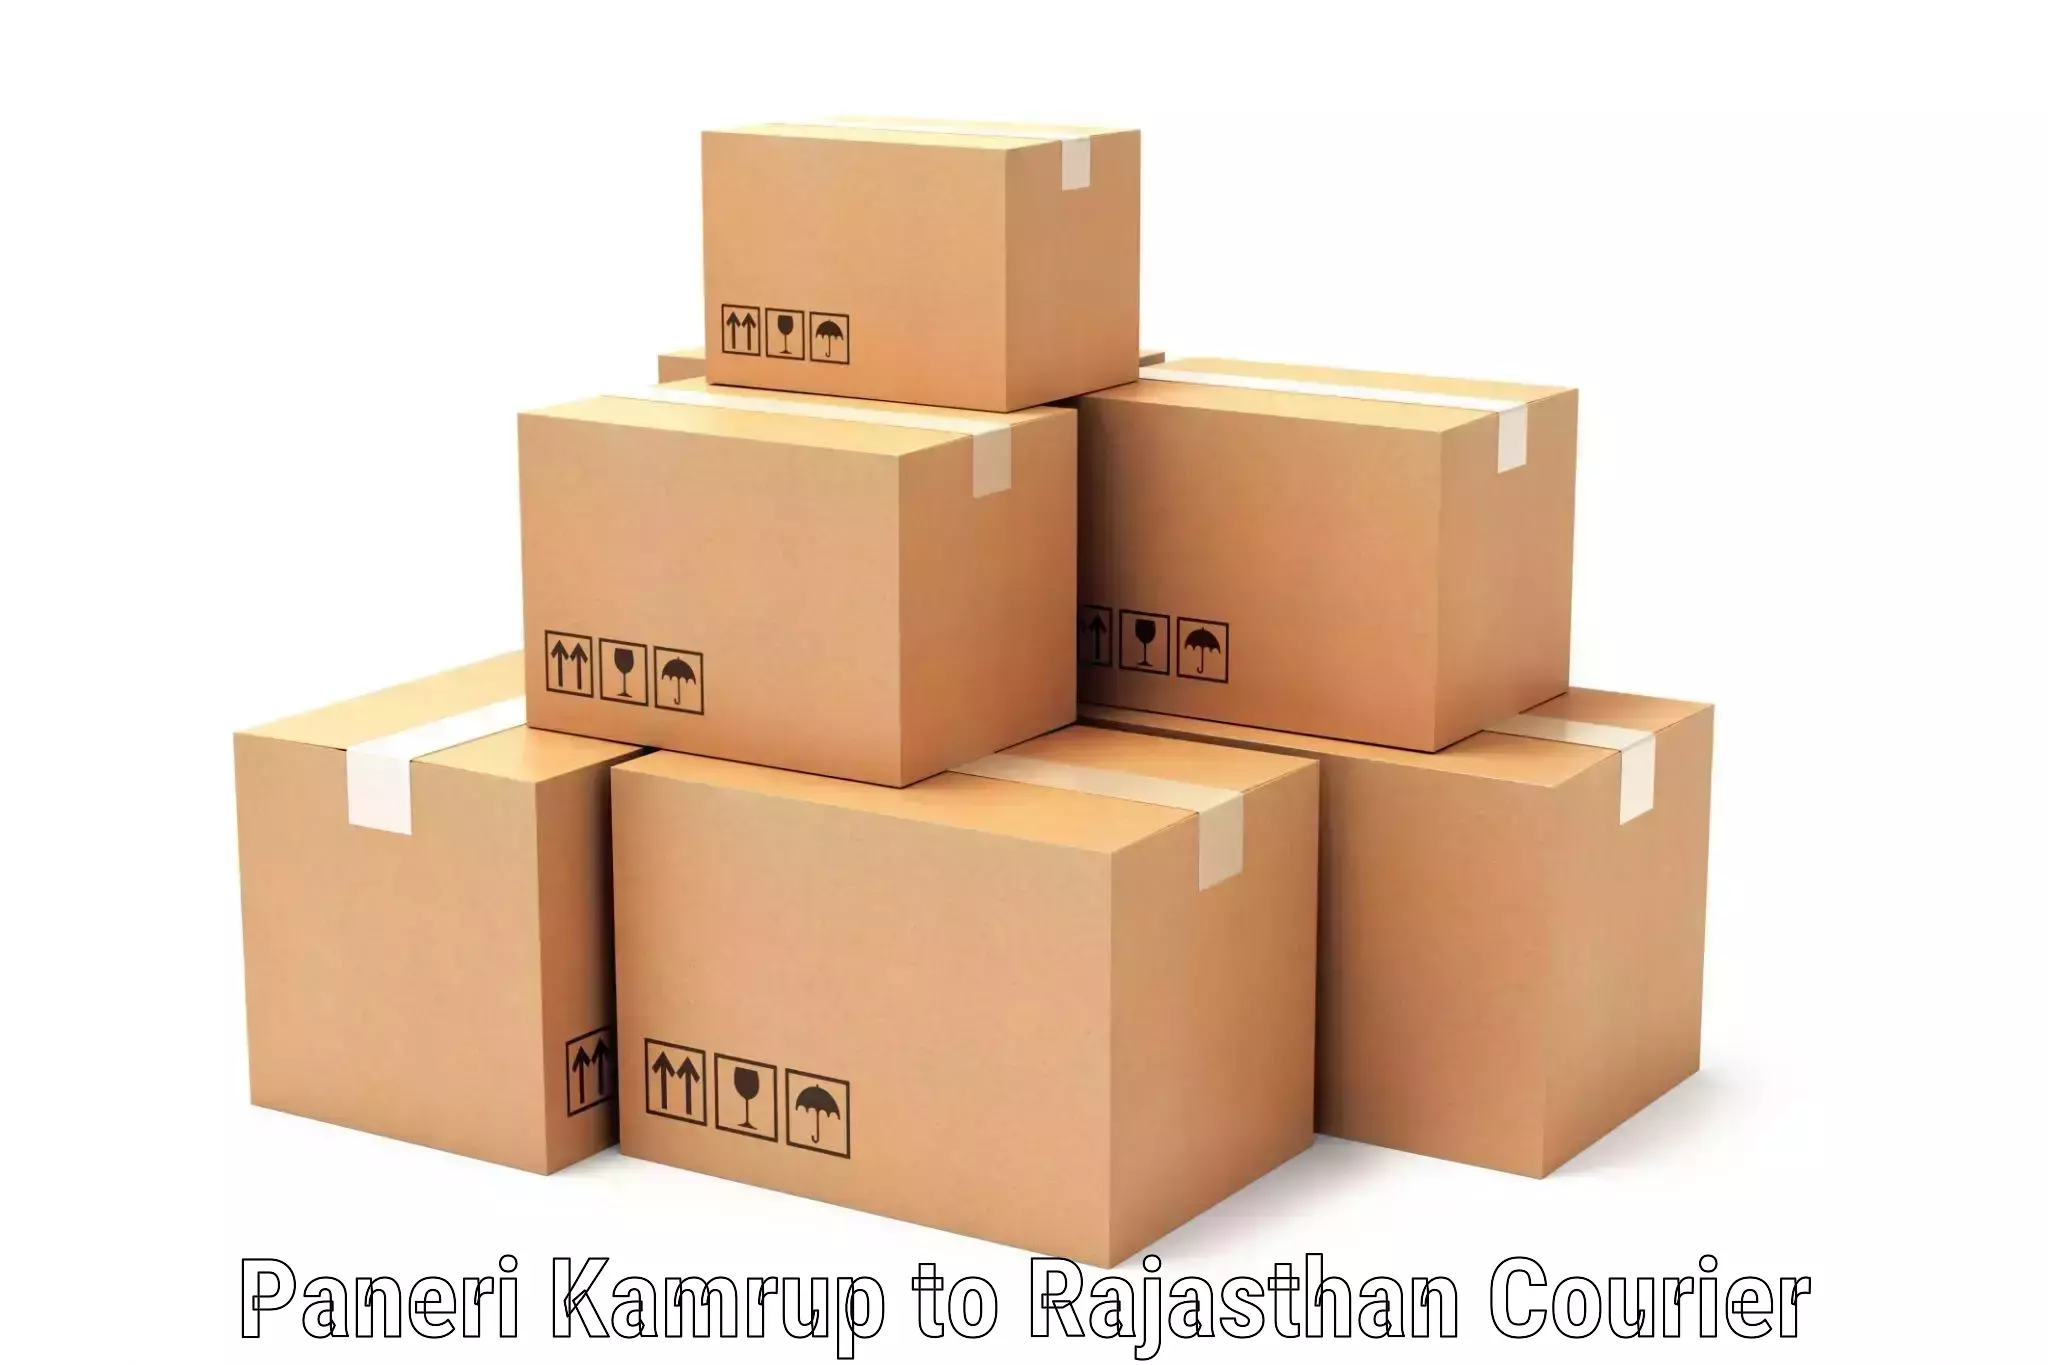 Reliable courier services Paneri Kamrup to Jodhpur